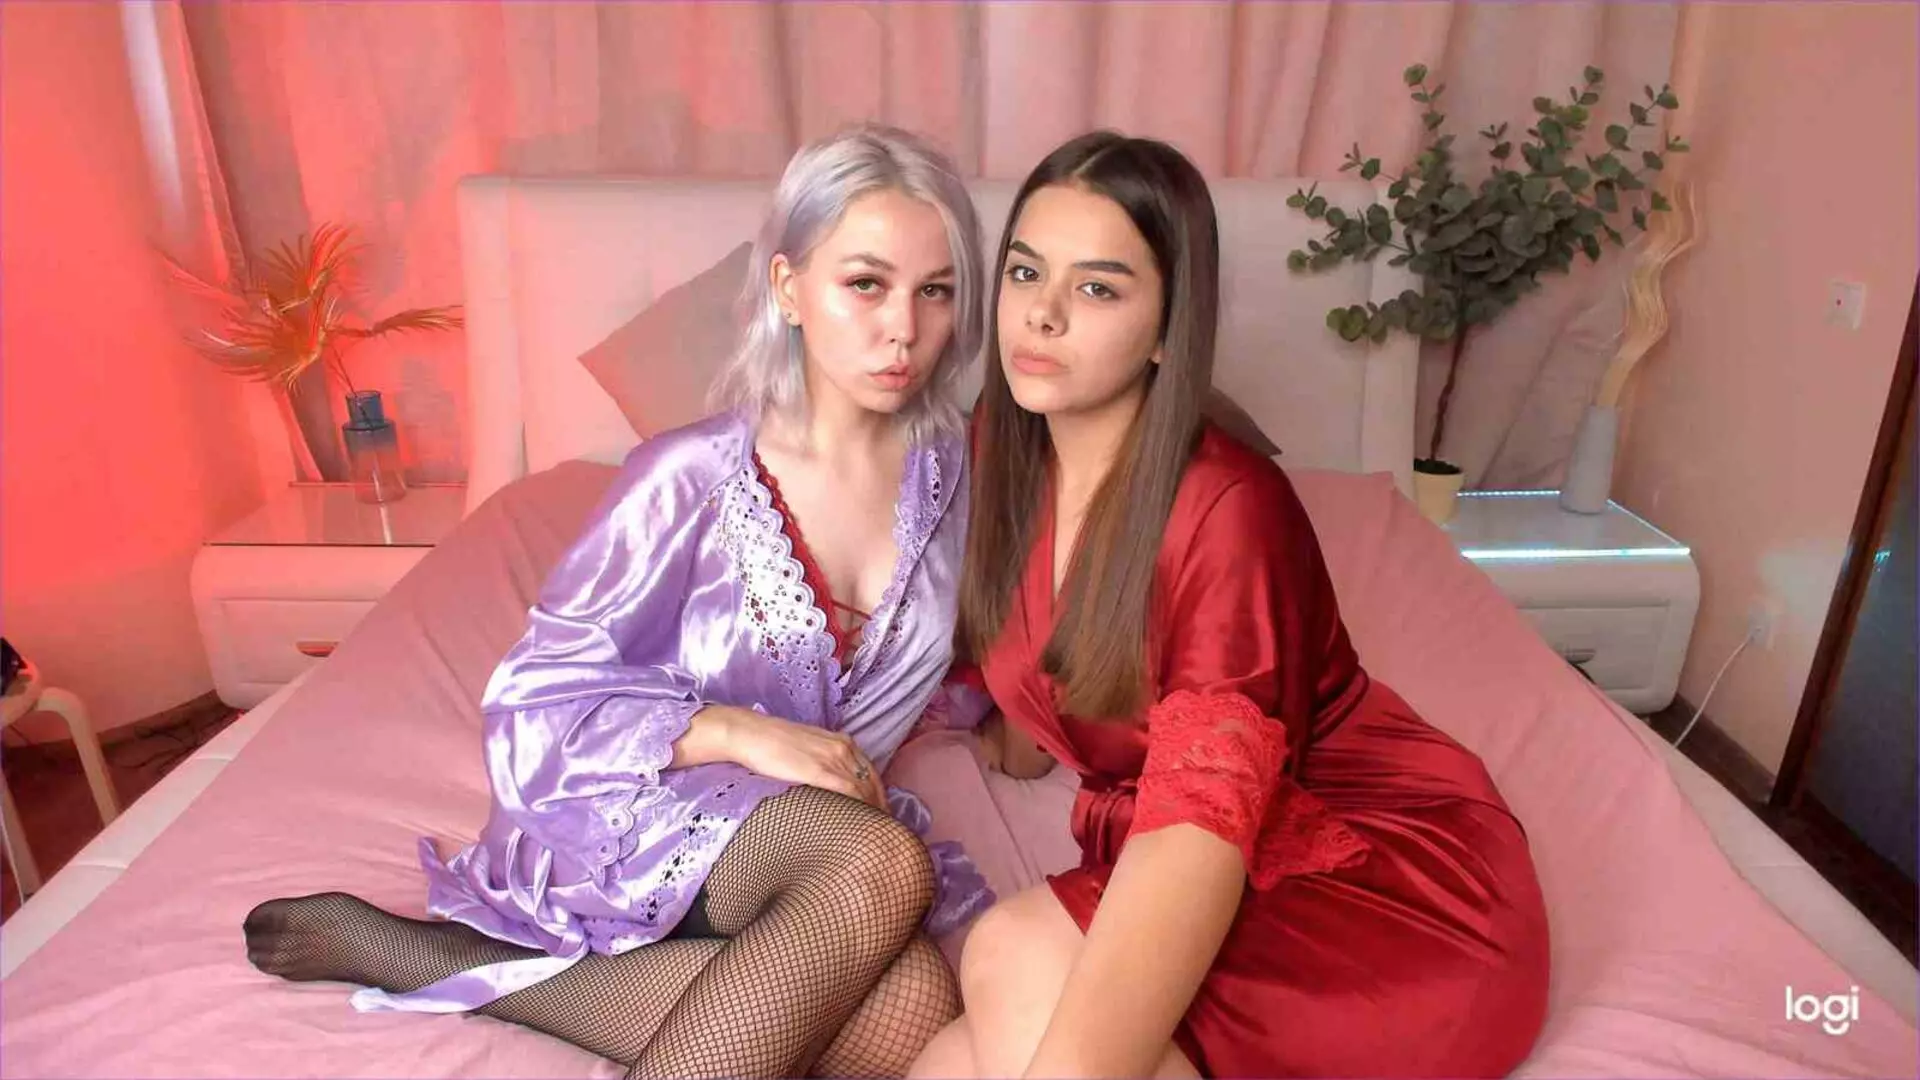 Join AnneAndHannah Private Chat